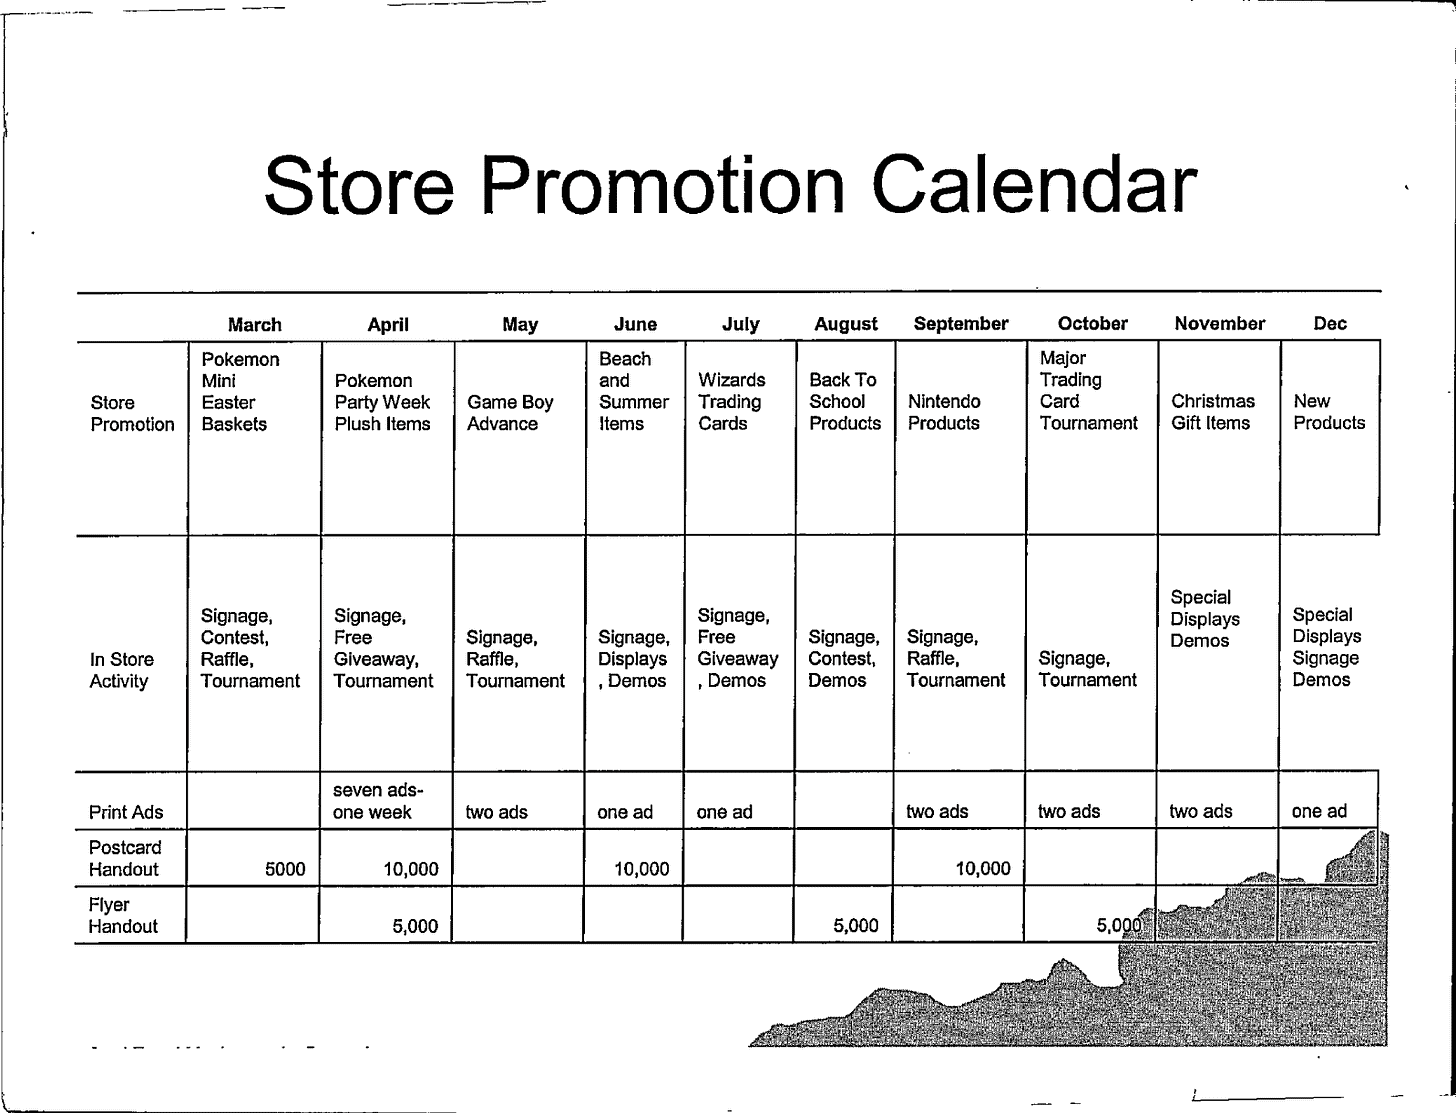 A store promotion calendar detailing the activities for each month